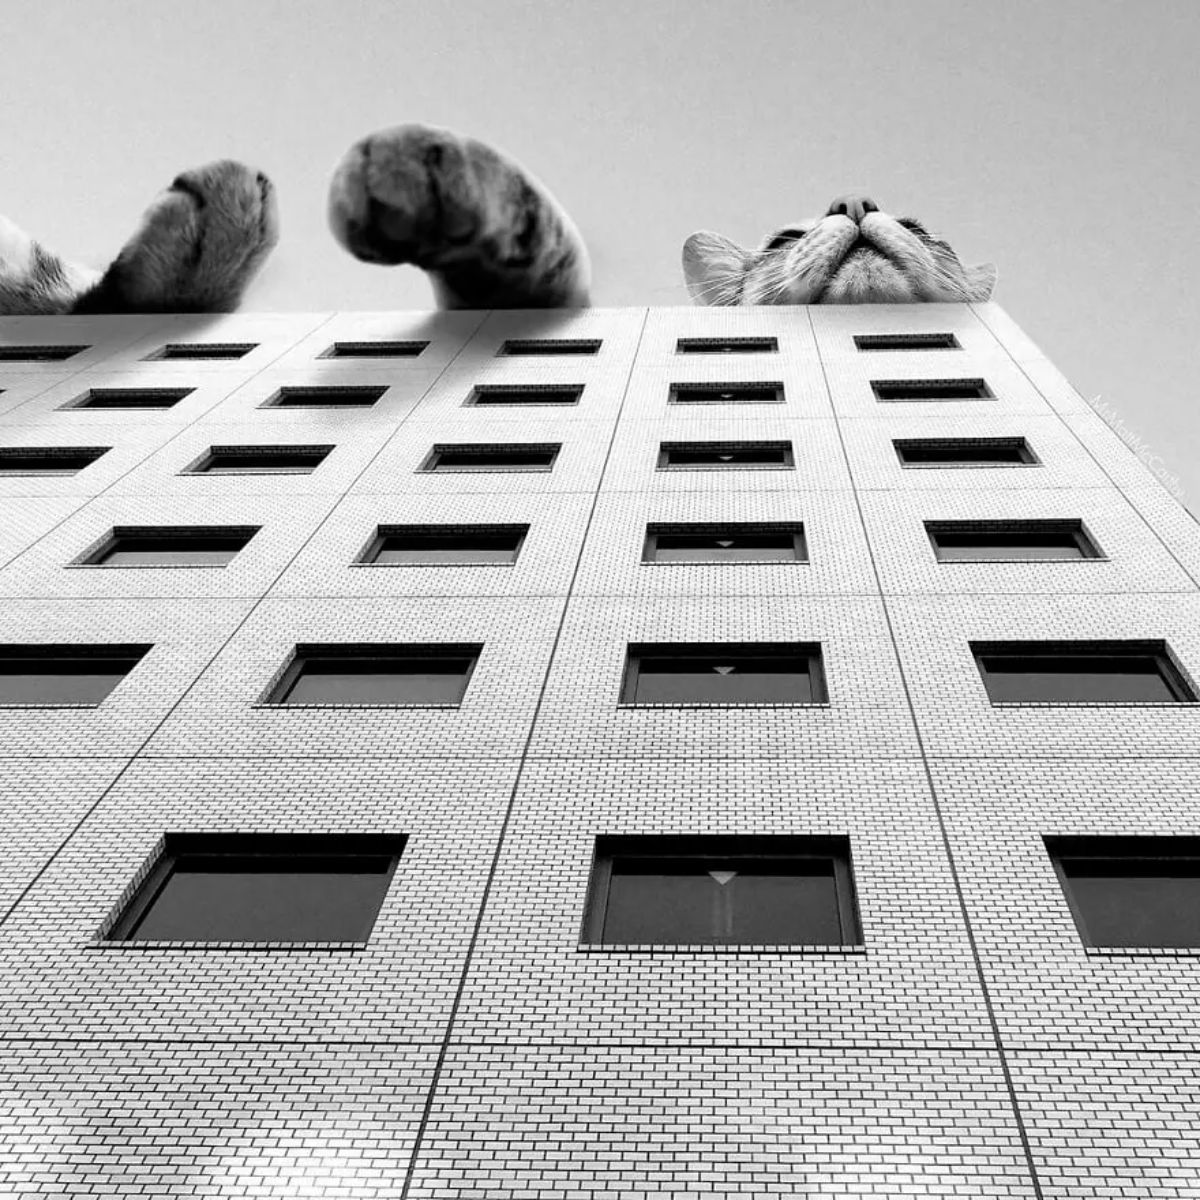 black and white image of large photoshopped cat laying on the top of a building